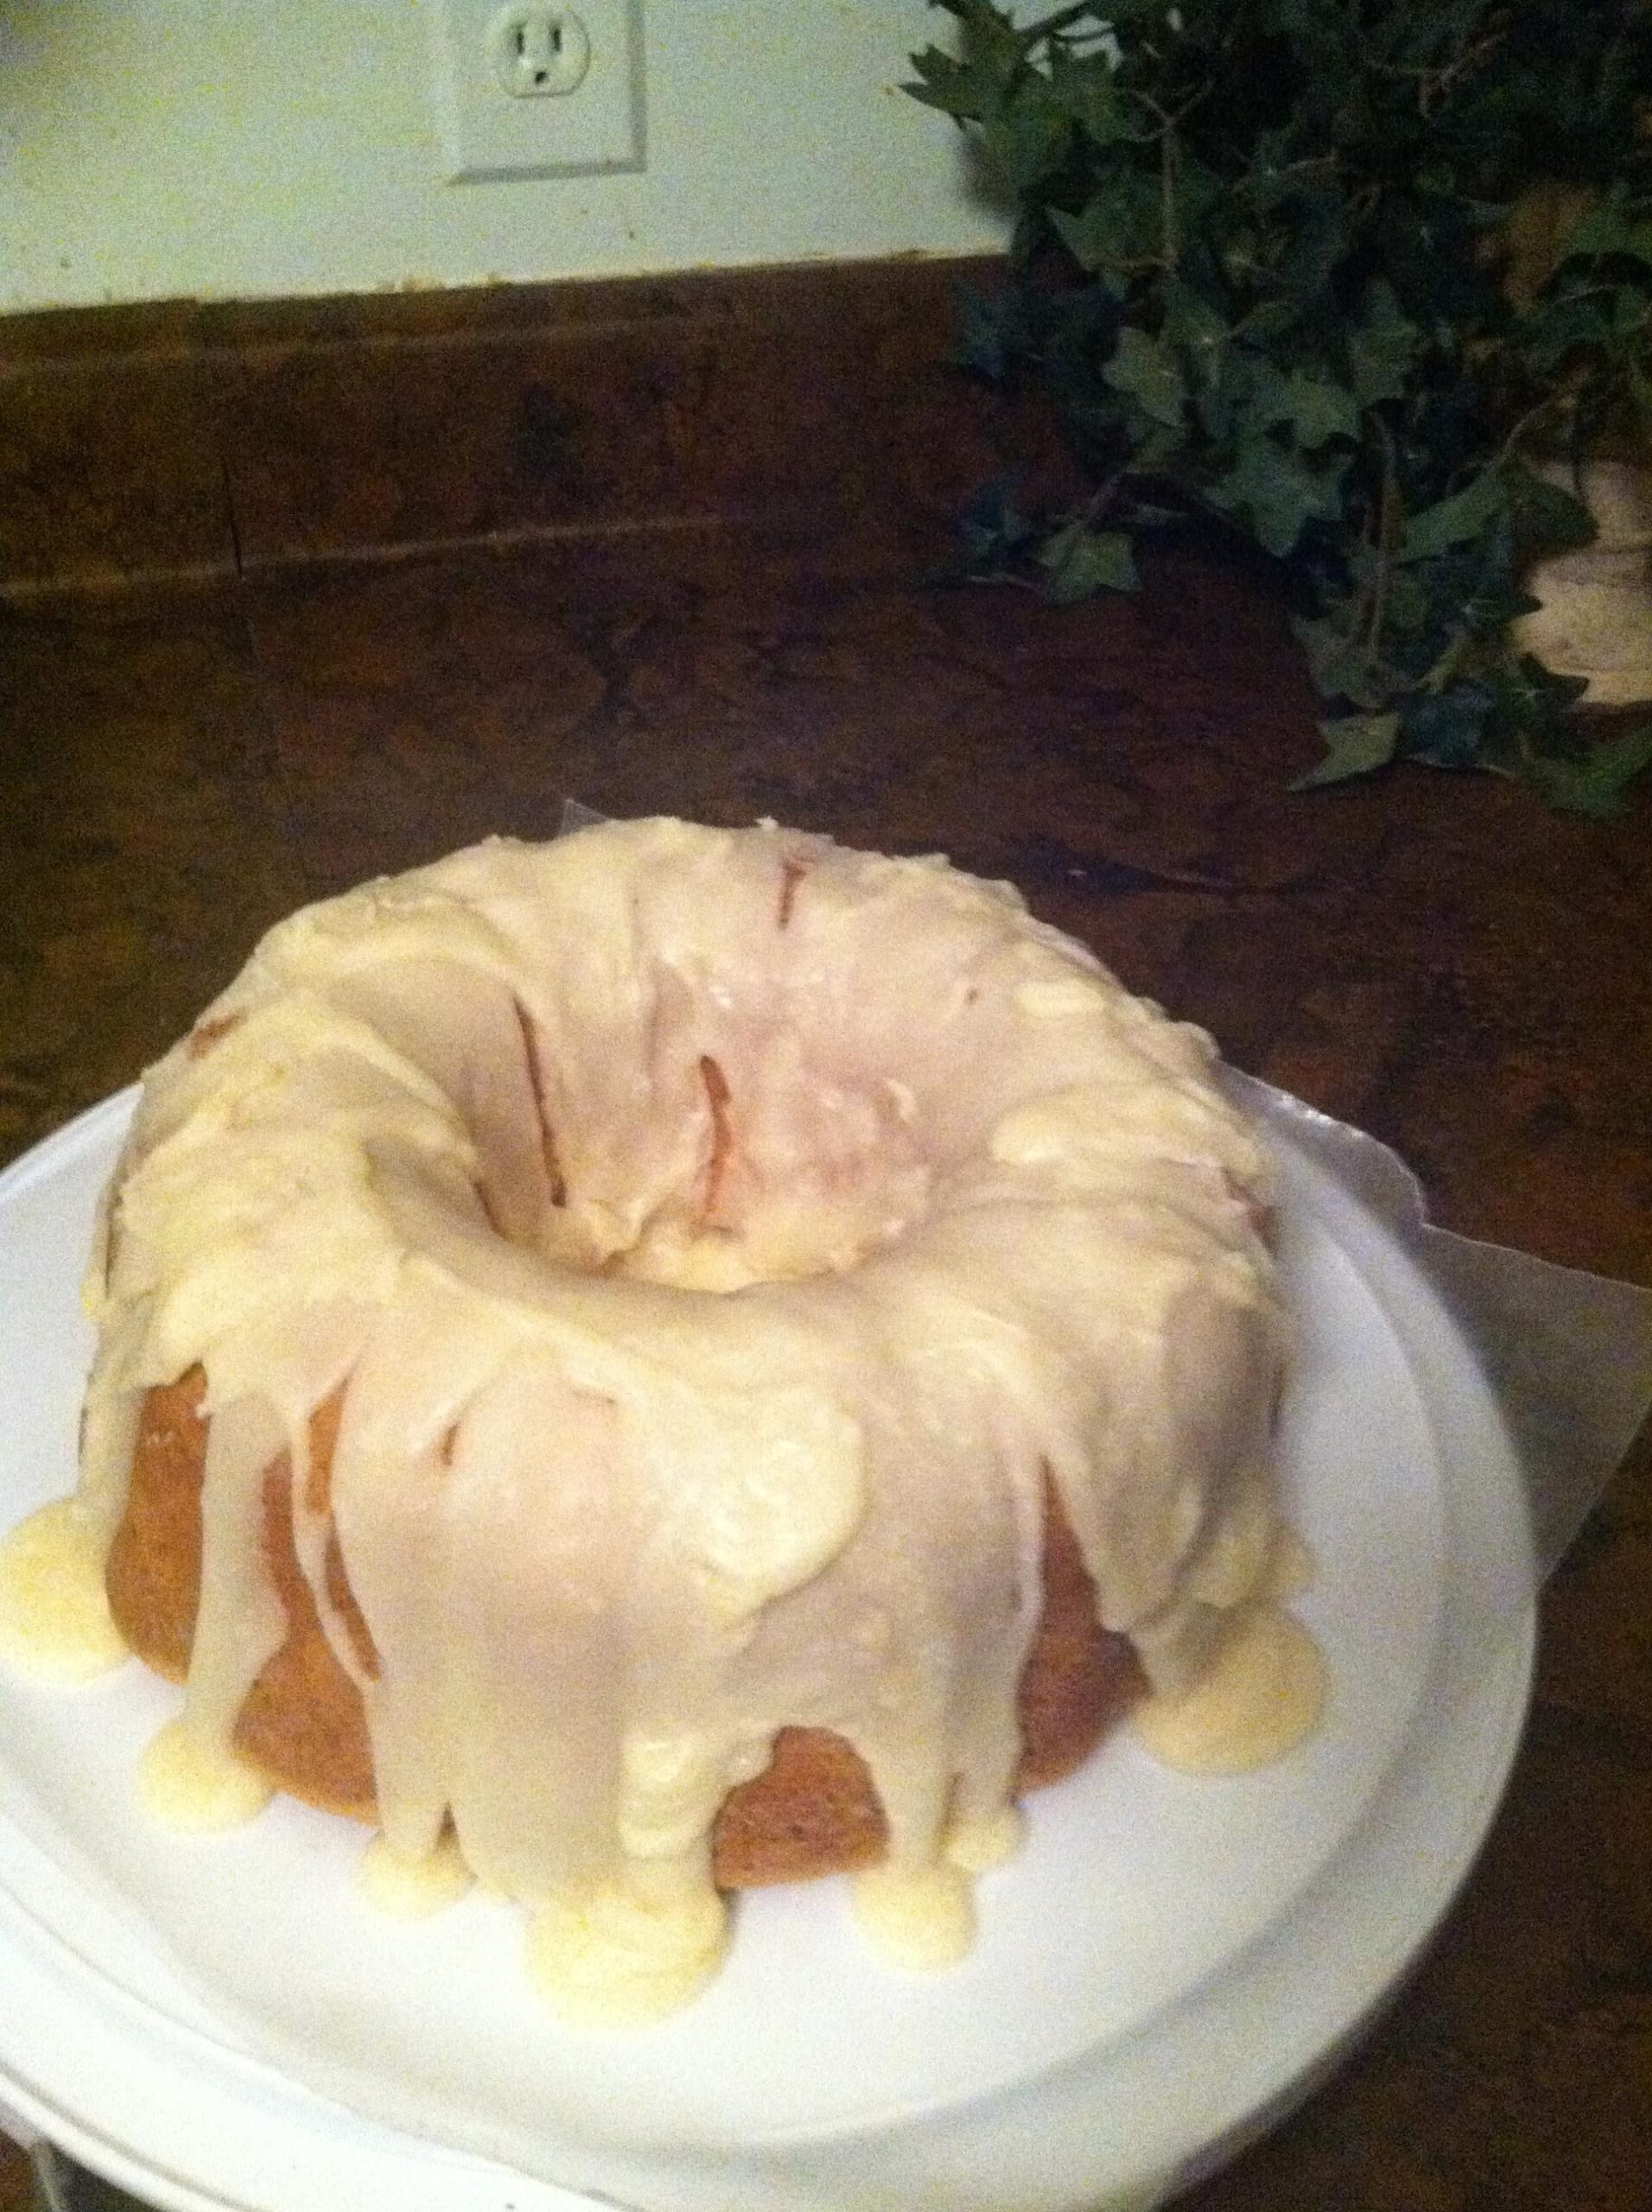  Smothered in white chocolate icing, this pound cake is a sweet lover's dream!